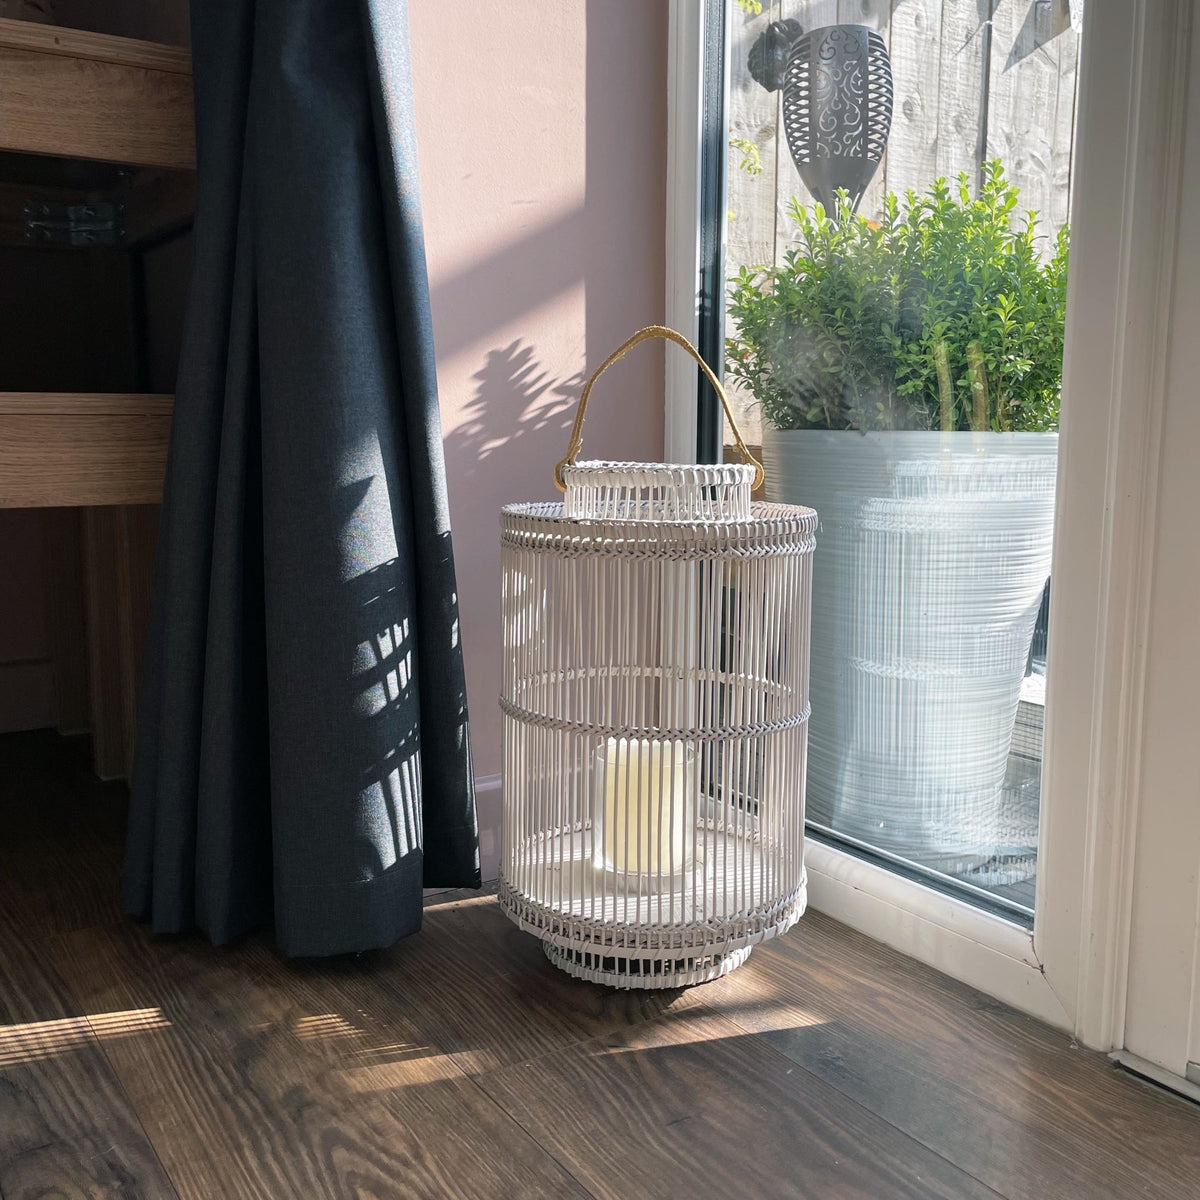 Usiku Bamboo Lantern in grey in a kitchen on a wooden floor with a planter behind